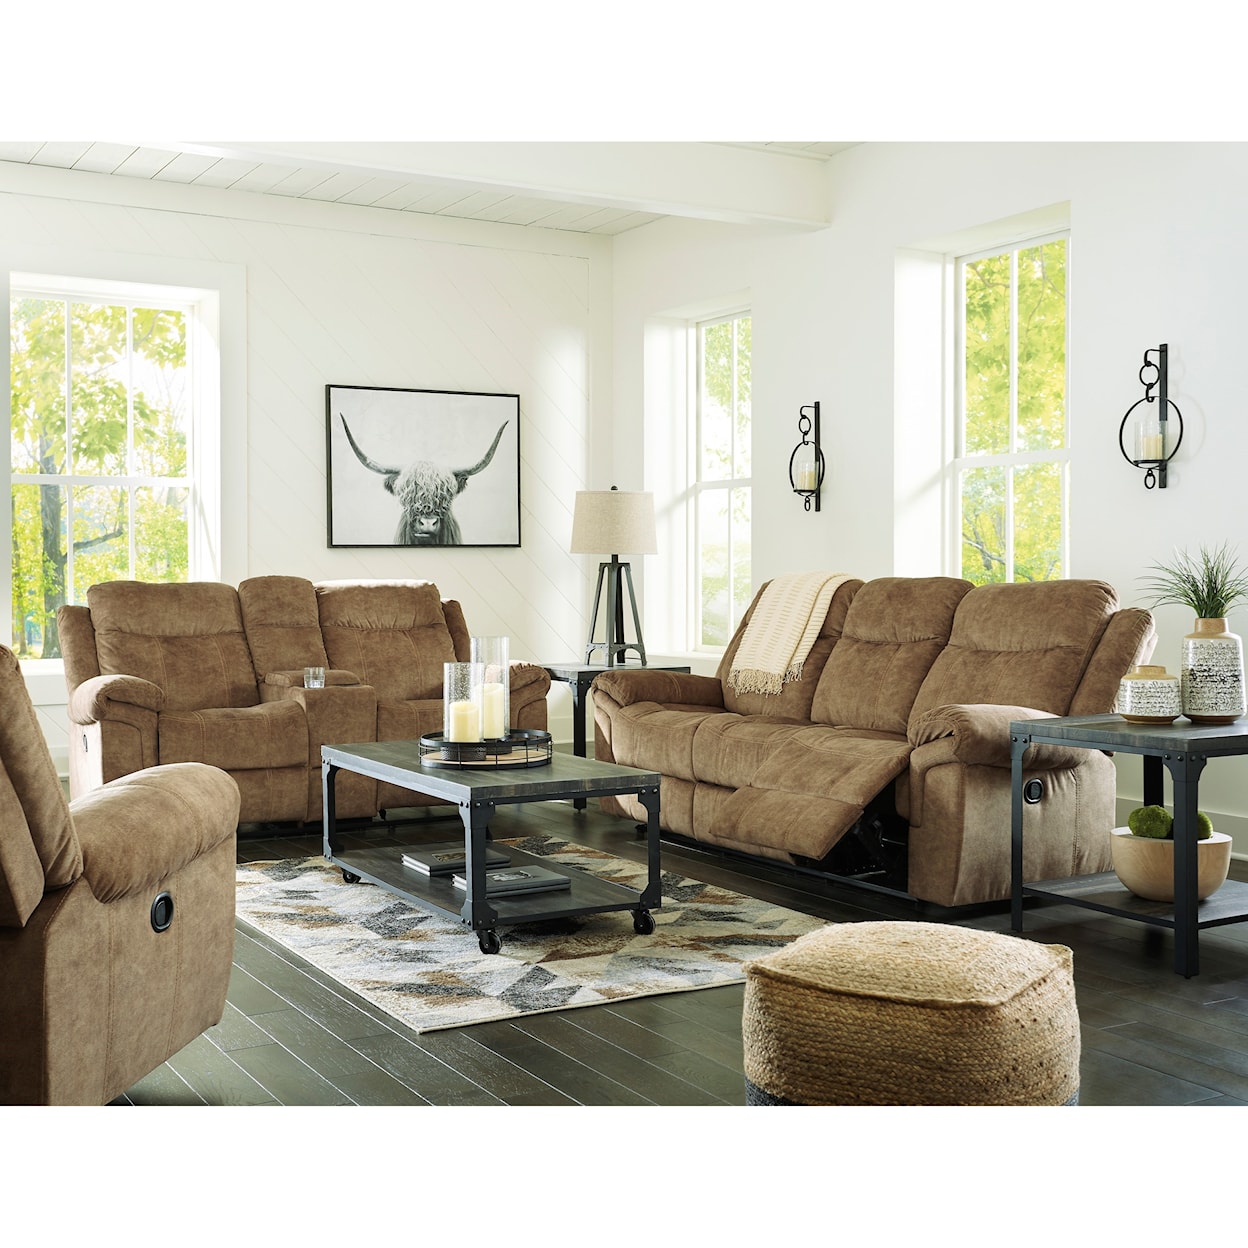 Signature Design by Ashley Furniture Huddle-Up Reclining Living Room Group